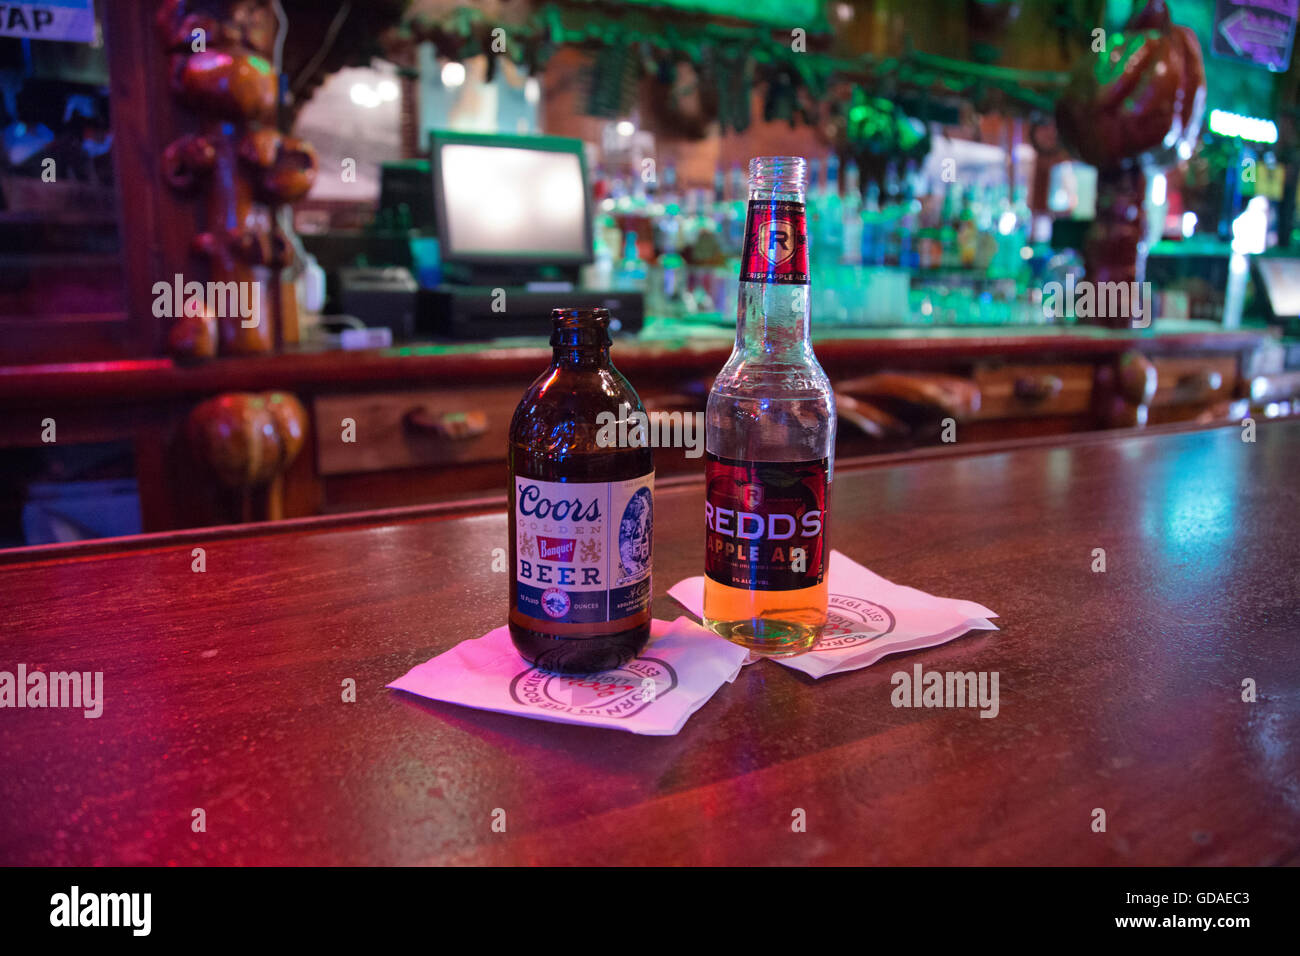 Coor's beer bottle and Ale bottle on bar counter in town of Sheridan  Wyoming USA Stock Photo